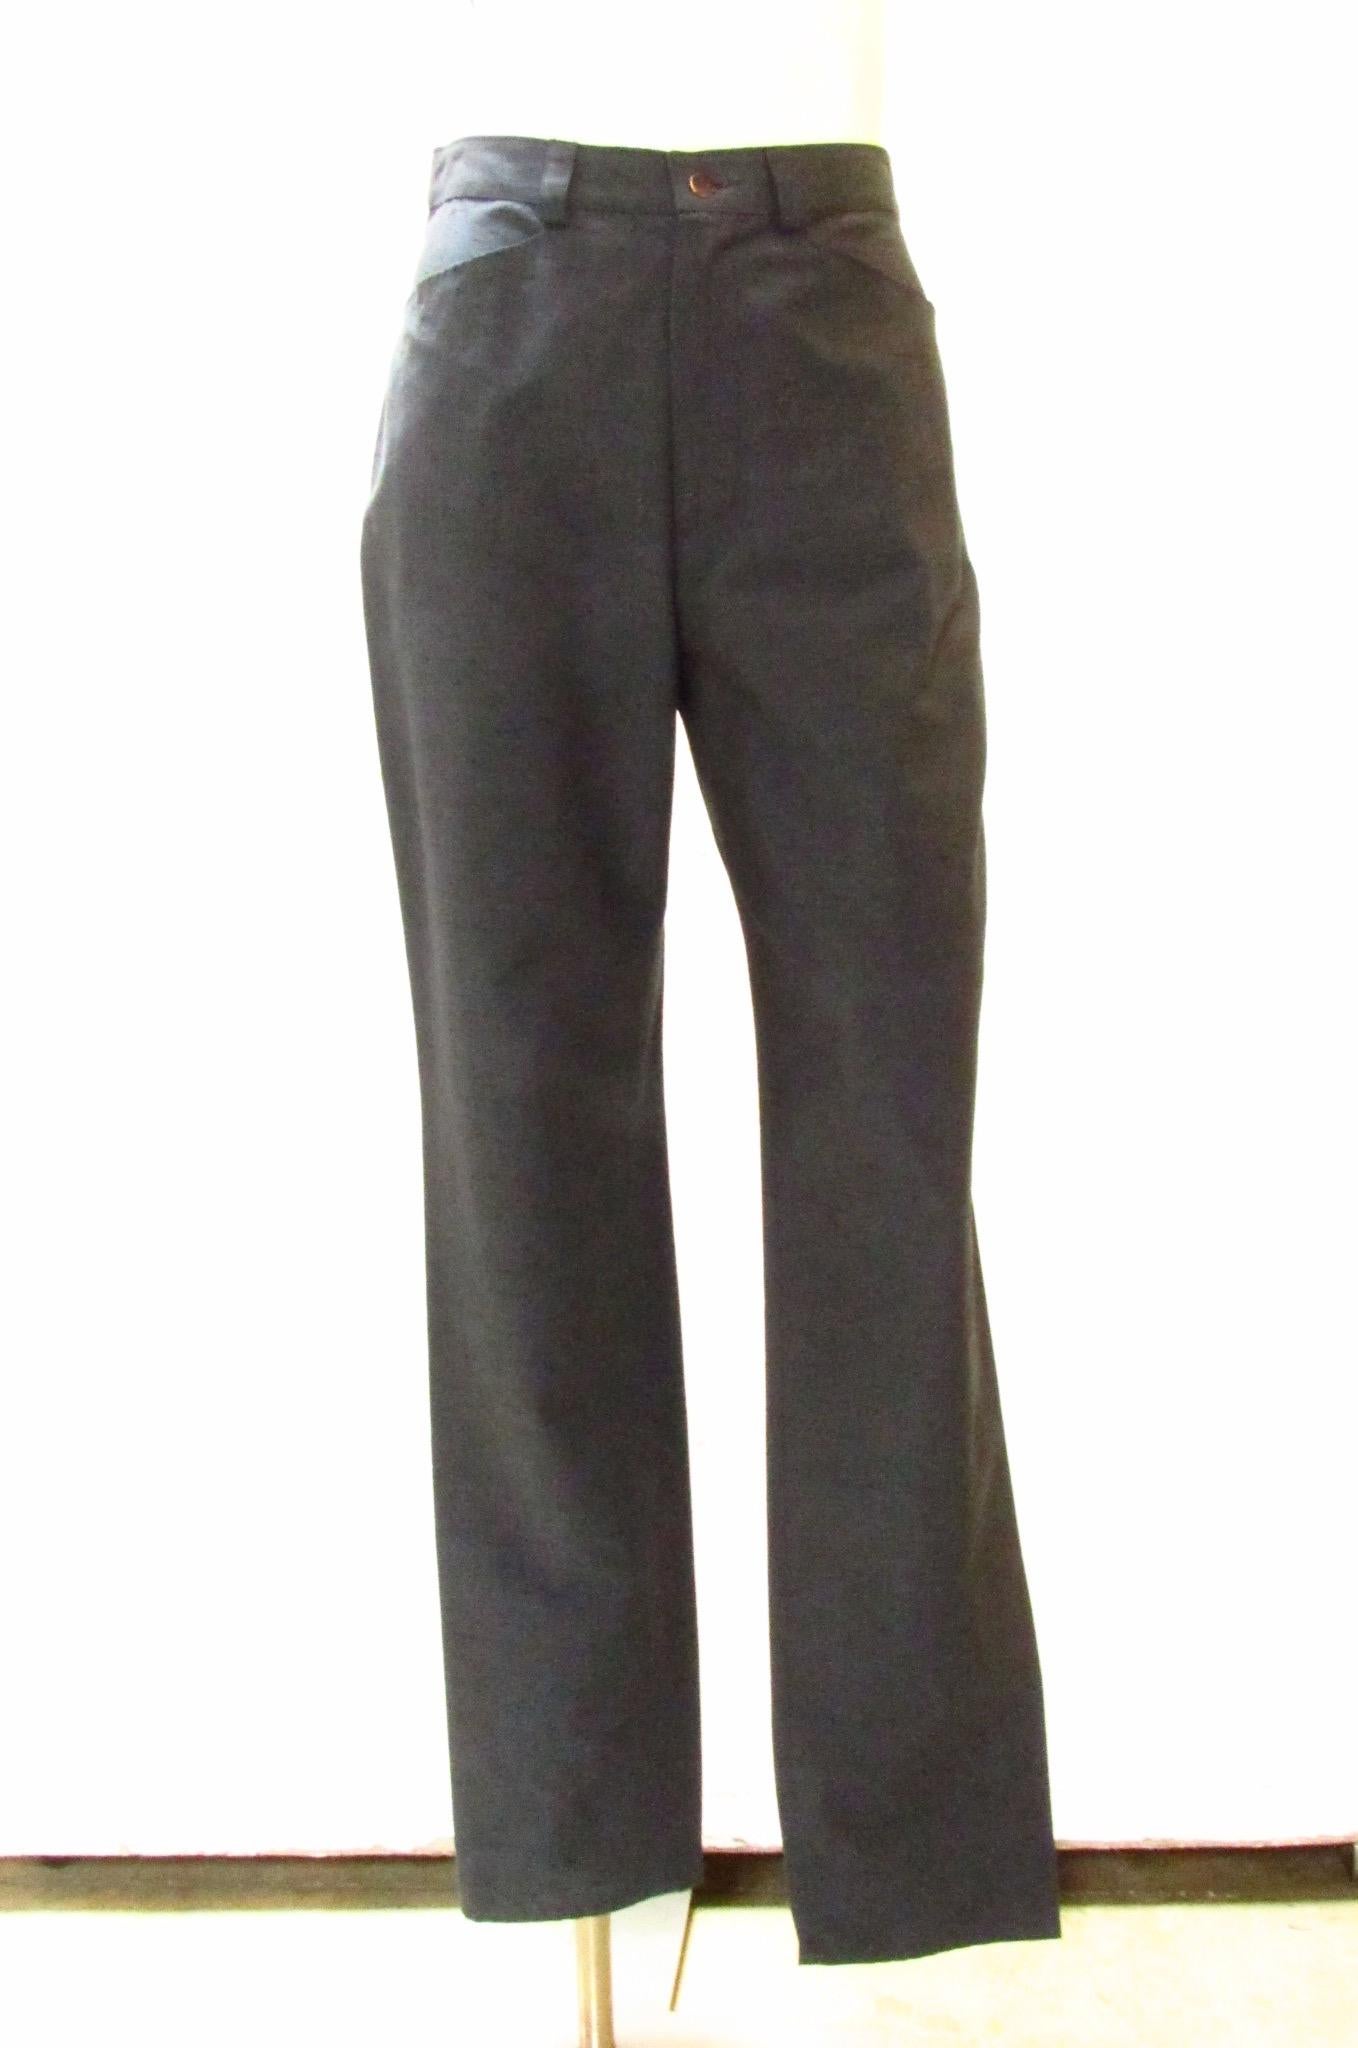 Vintage Jean Paul Gaultier Classique pant comes in a grayish blue lightweight rayon. These pants have all the styling of your favorite jeans (belt loops, zippered fly, front and back pockets), but in a more stylish and comfortable linen-look.